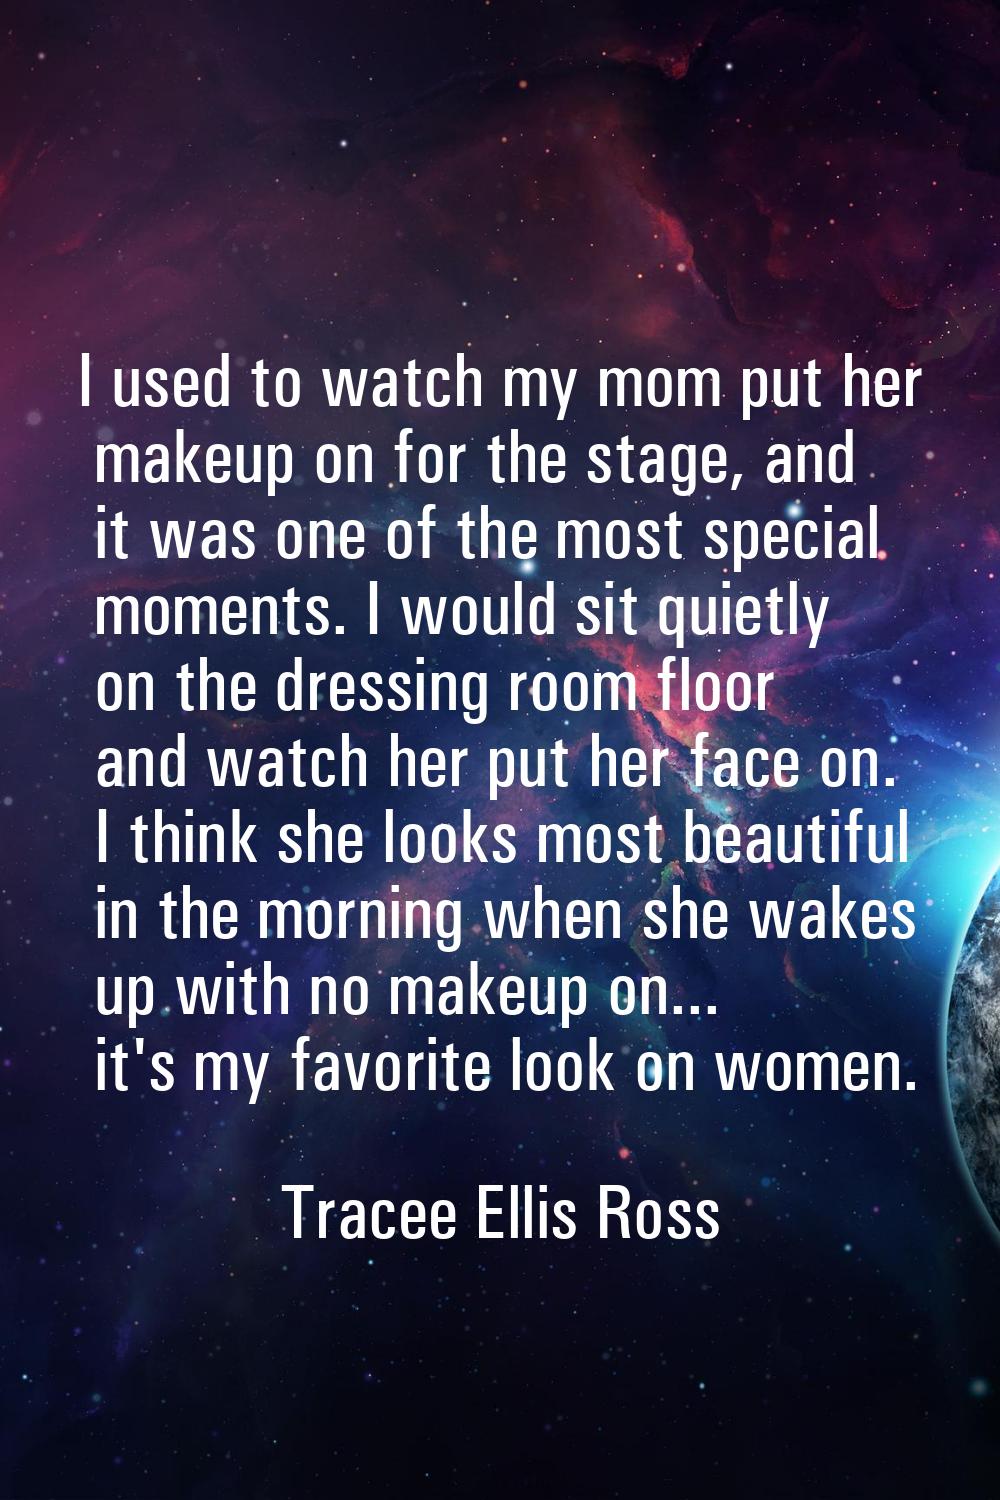 I used to watch my mom put her makeup on for the stage, and it was one of the most special moments.